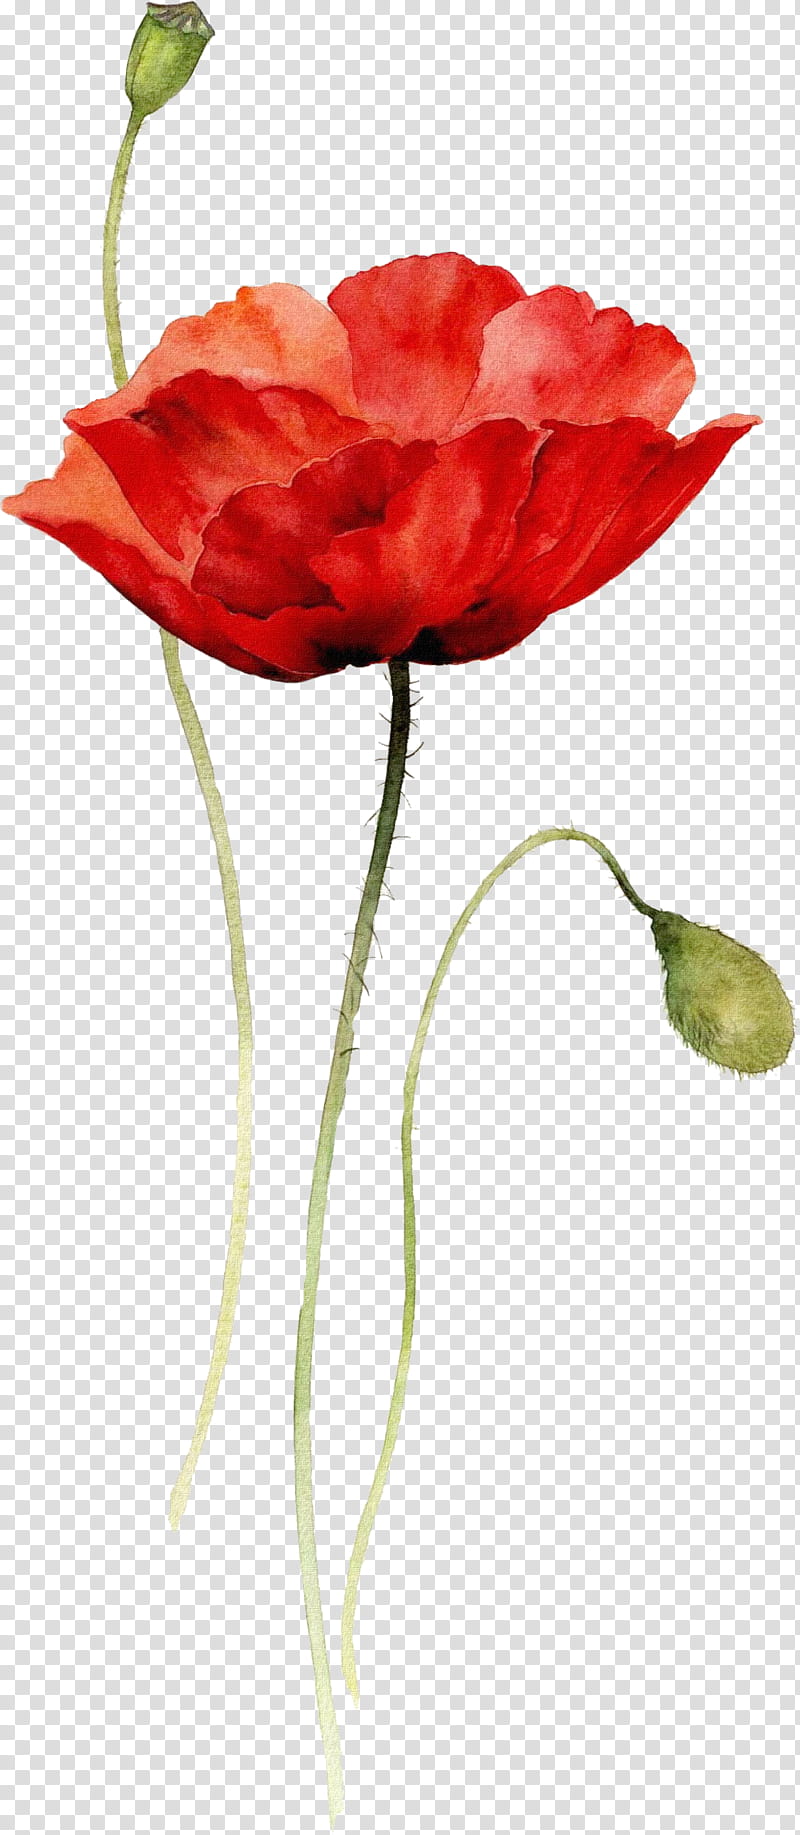 Red Abstract Watercolor Flowers Watercolor Painting Poppy Drawing Poppy Flowers Common Poppy Artist Trading Cards Transparent Background Png Clipart Hiclipart